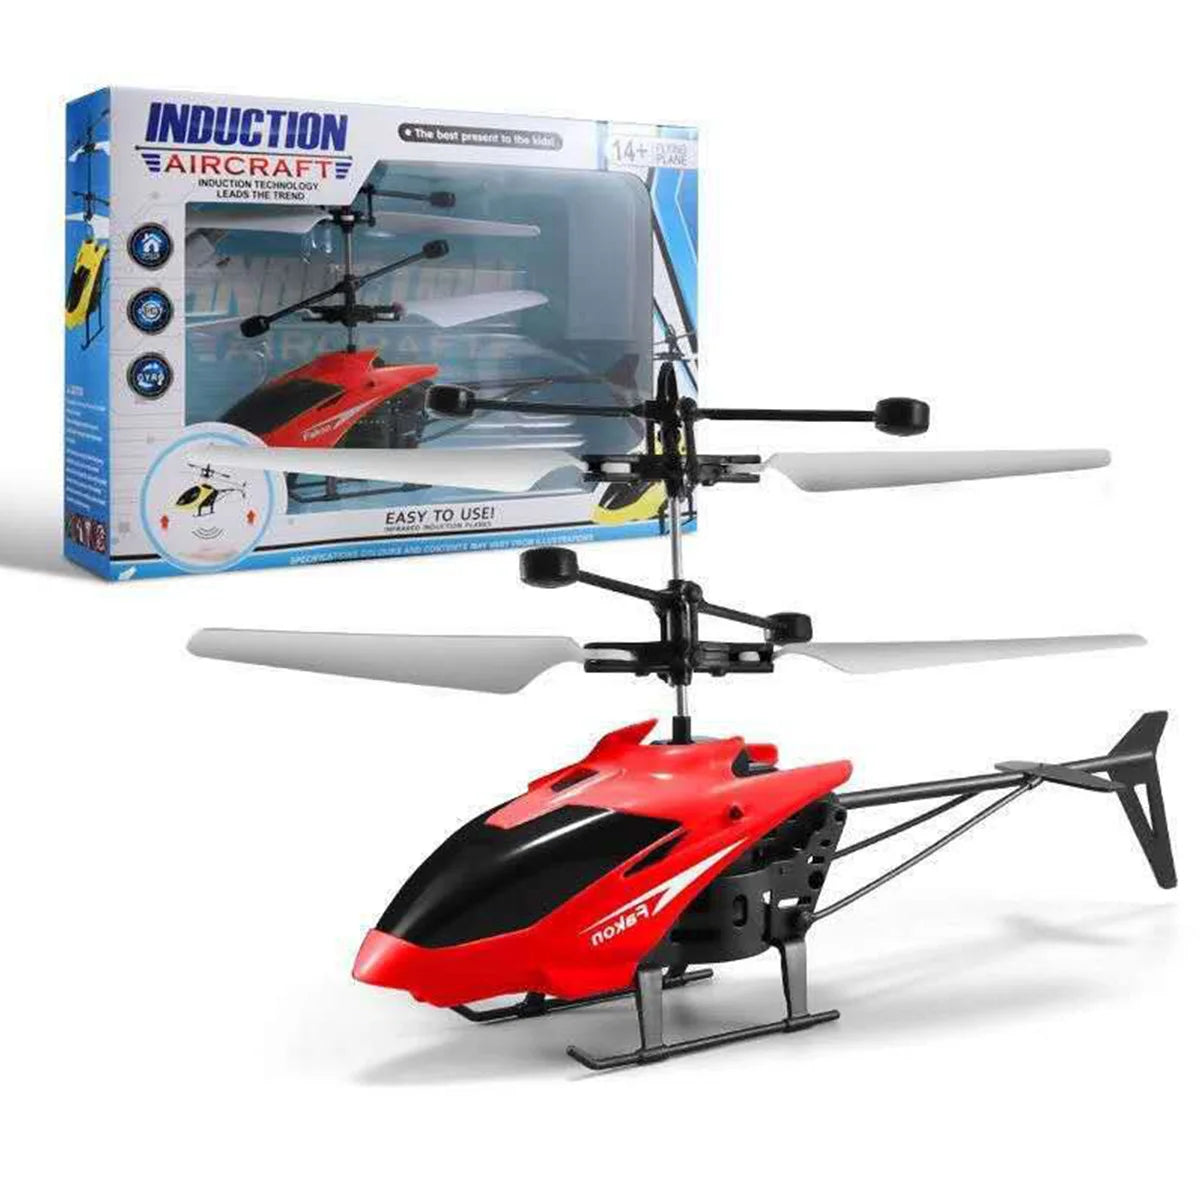 CY-38 Rc Helicopter, Oeoe % AIRCRAFTE oucio FicOnoi U